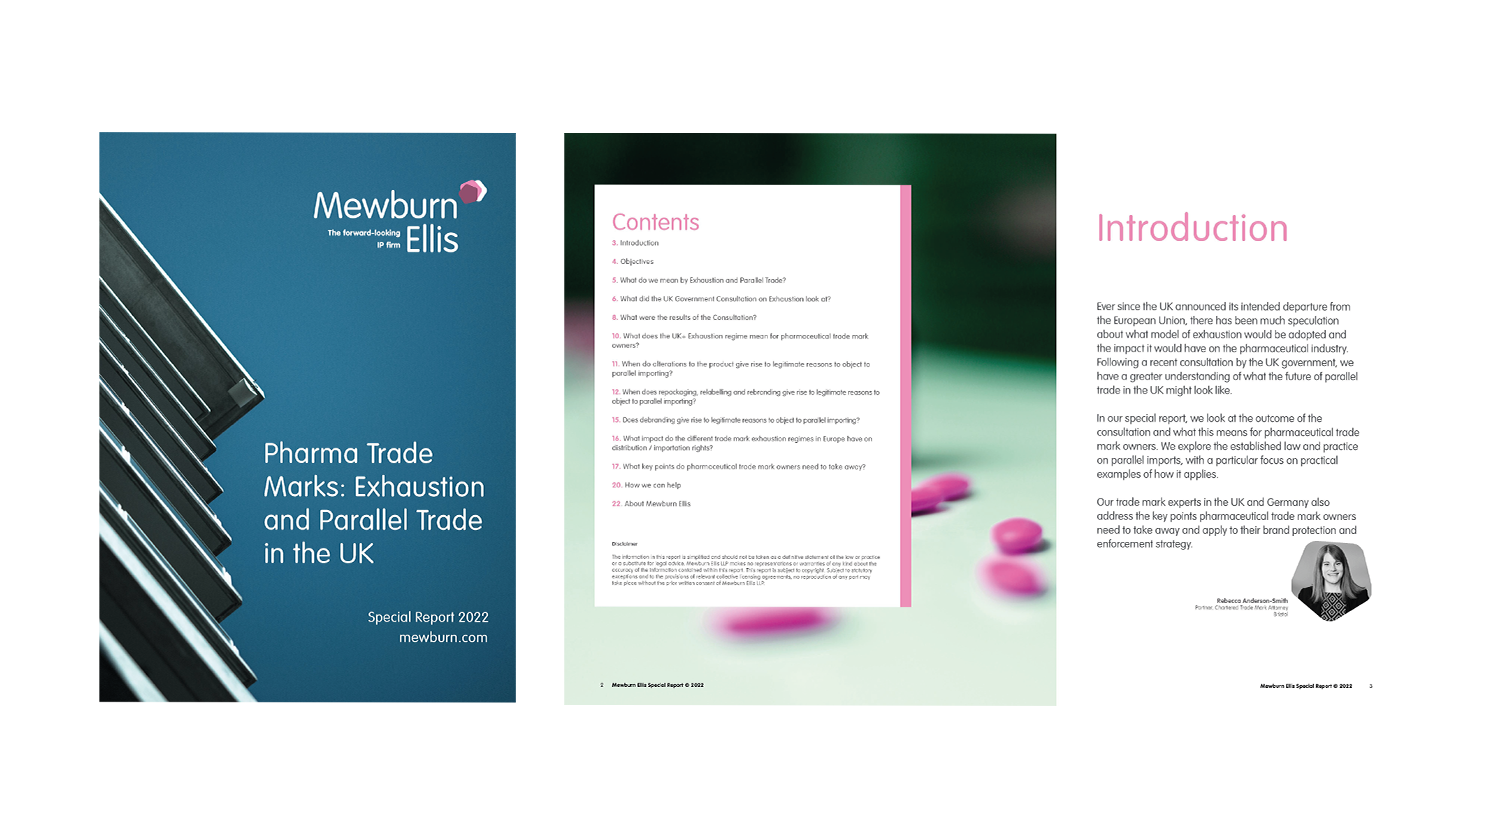 Pharma Trade Marks - Exhaustion and Parallel Trade in the UK5